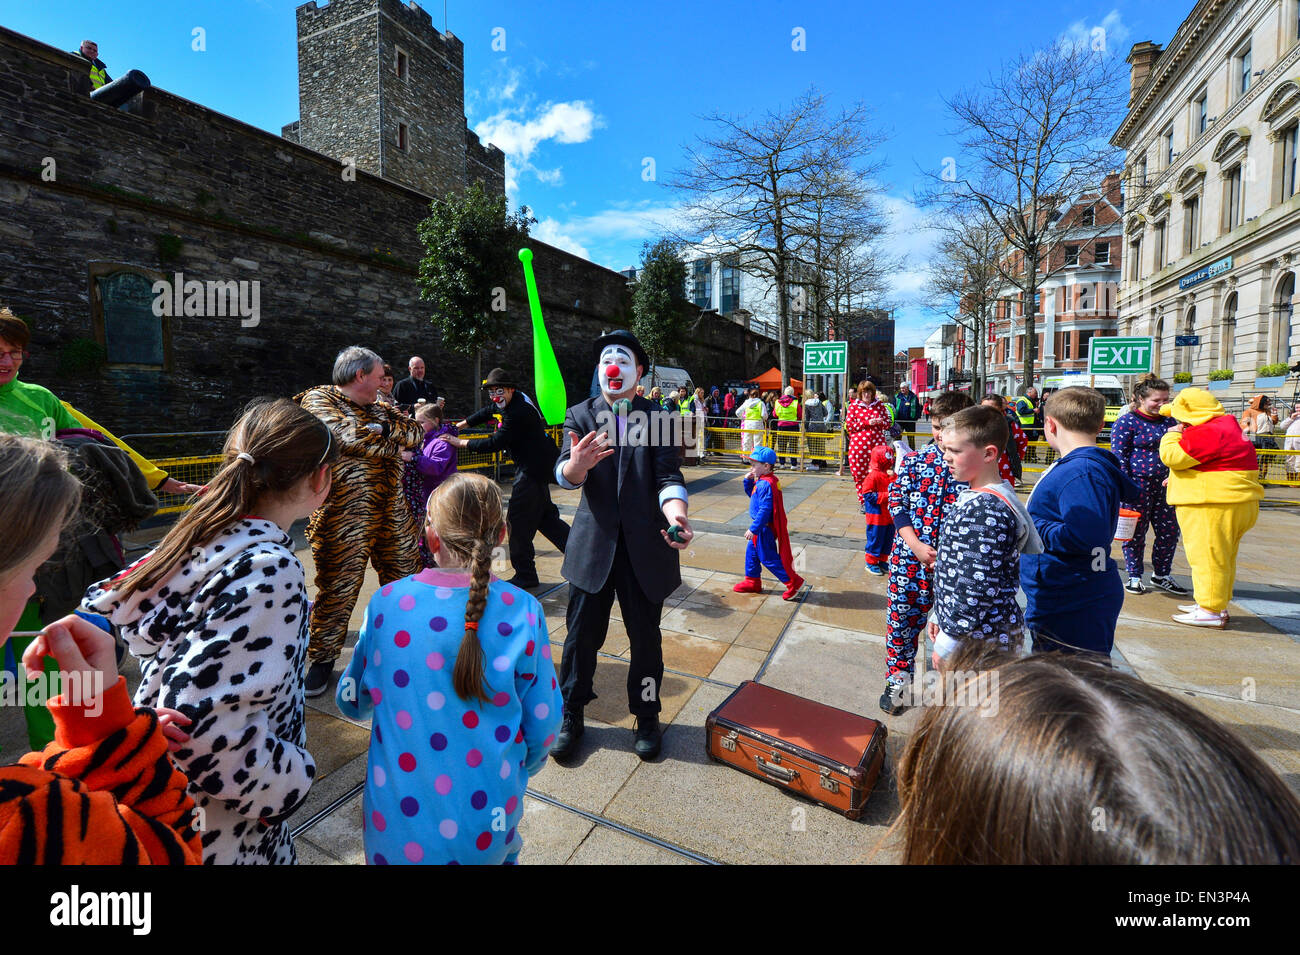 Clown with painted face, red nose and wearing a hat entertaining children dressed in onesies in the Guildhall Square, Derry, Lon Stock Photo